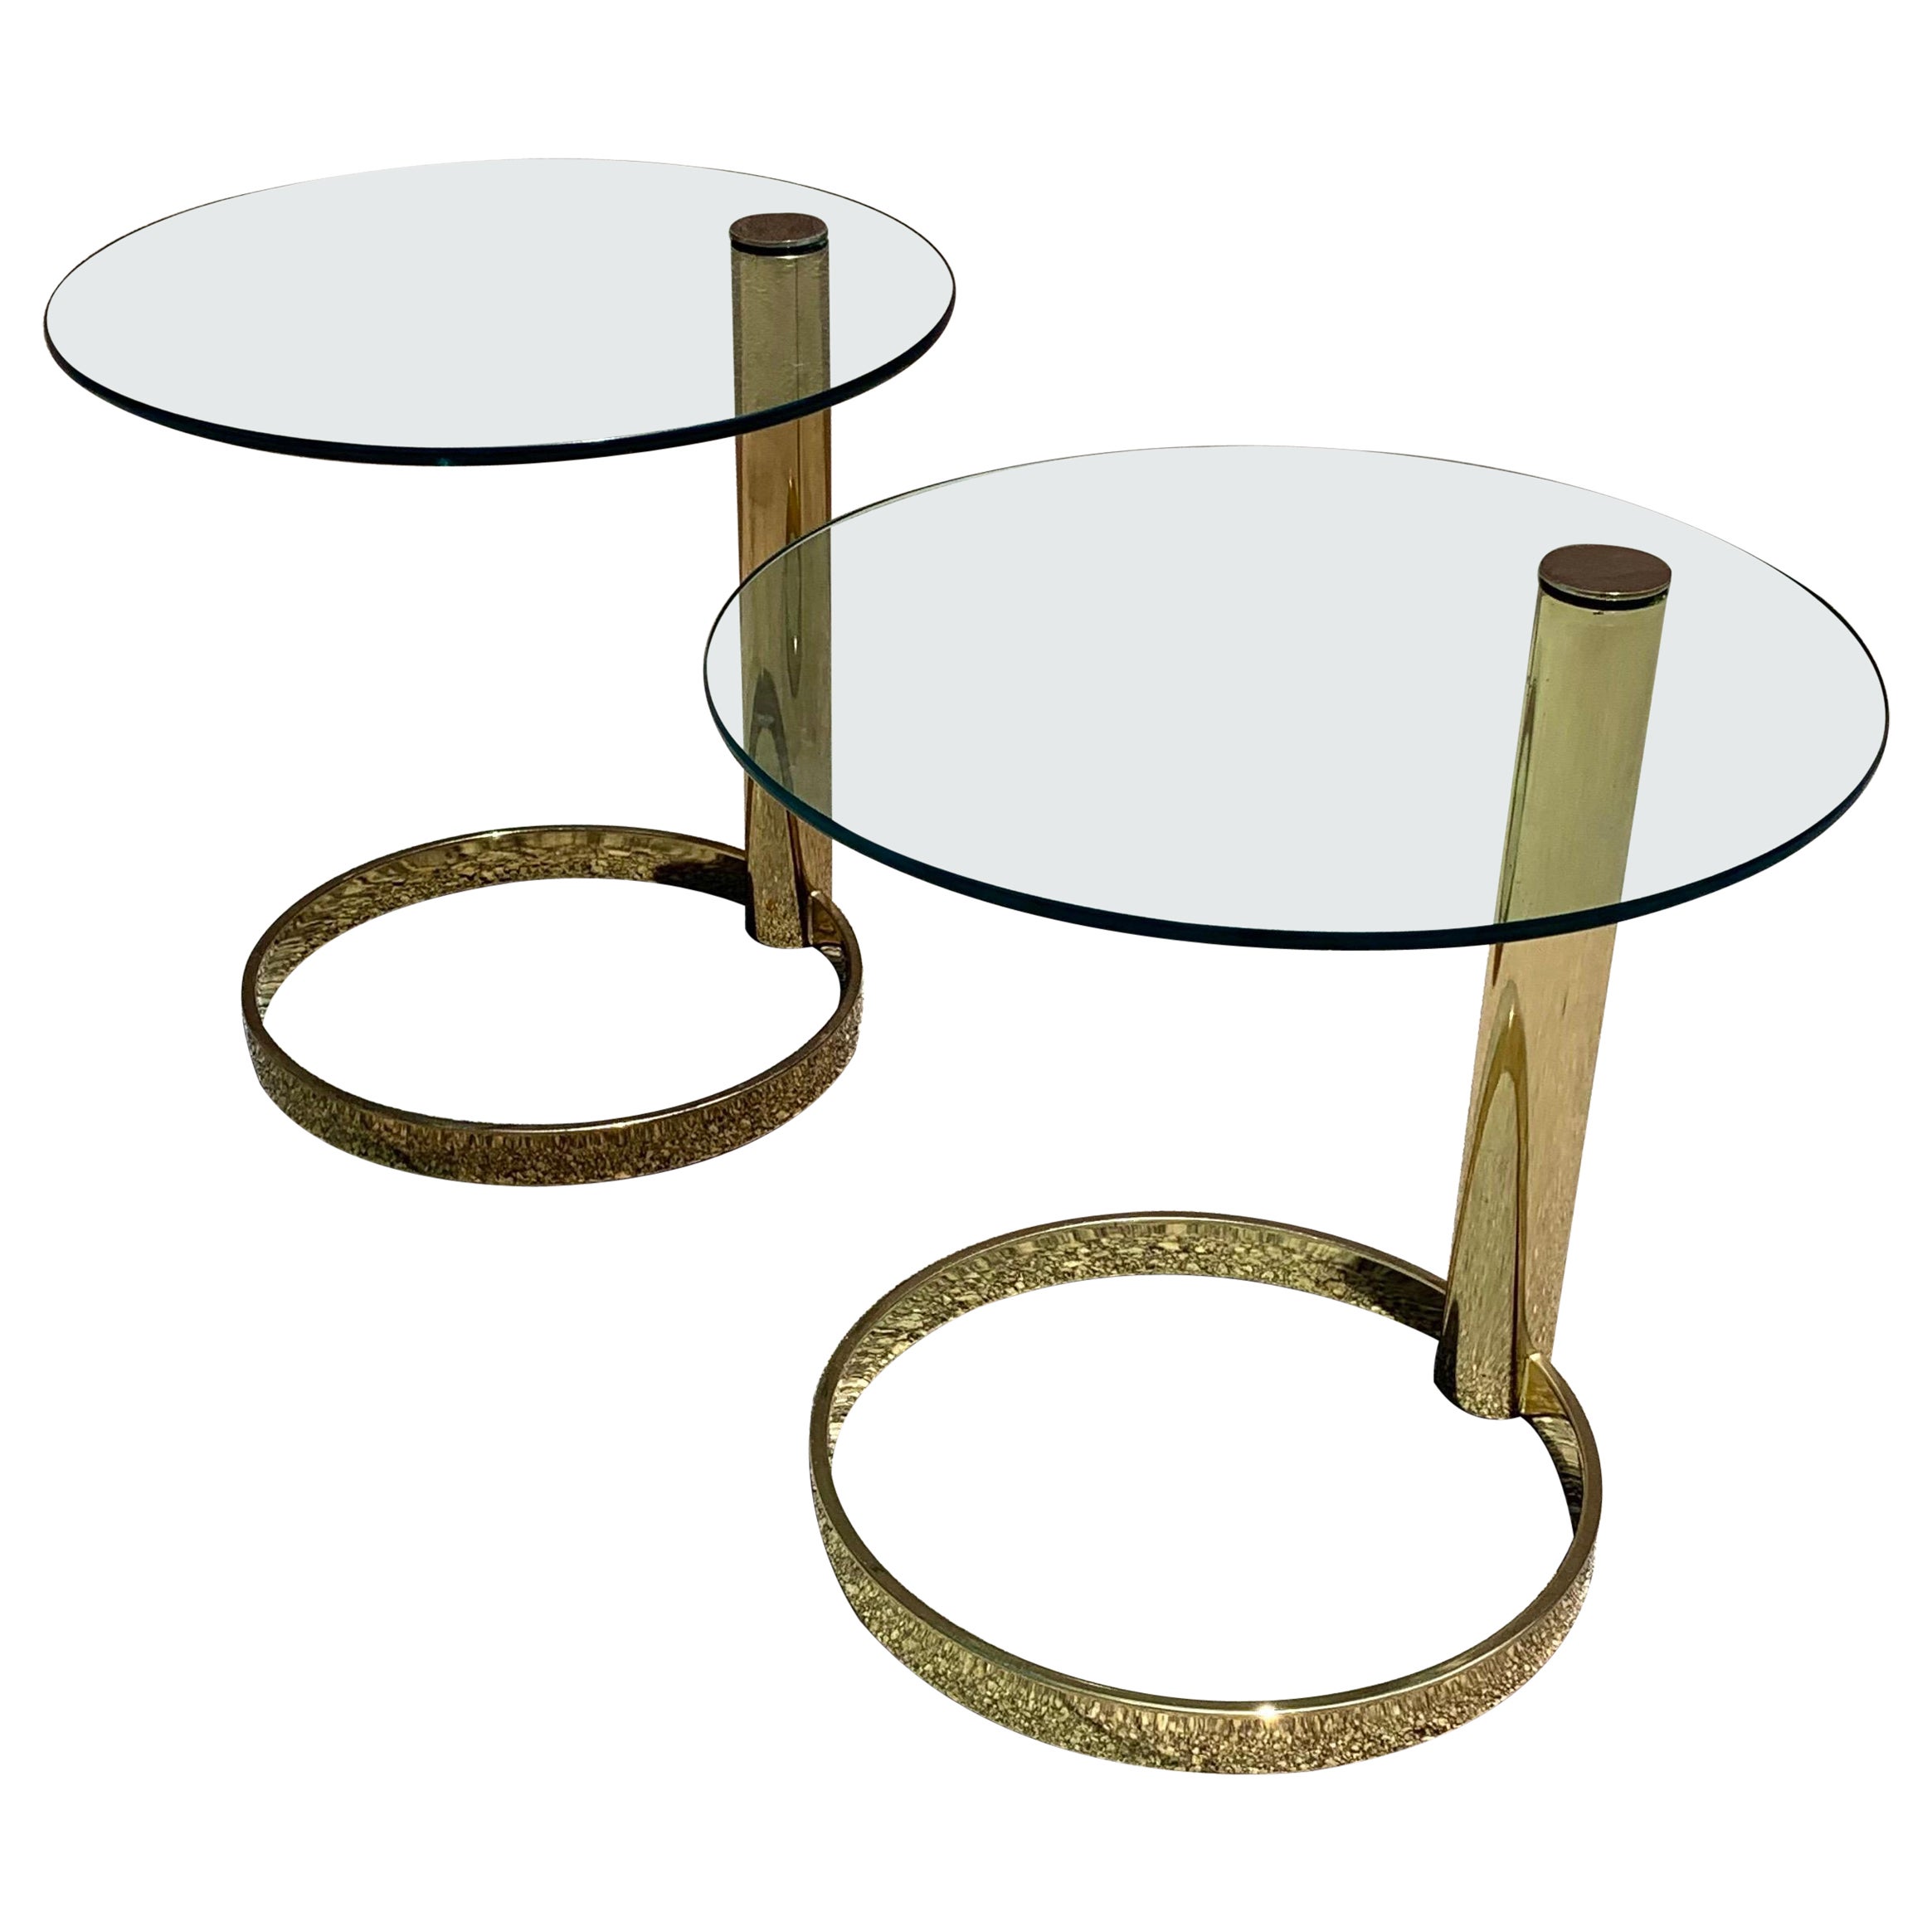 Leon Rosen for Pace Brass Side Tables, a Pair